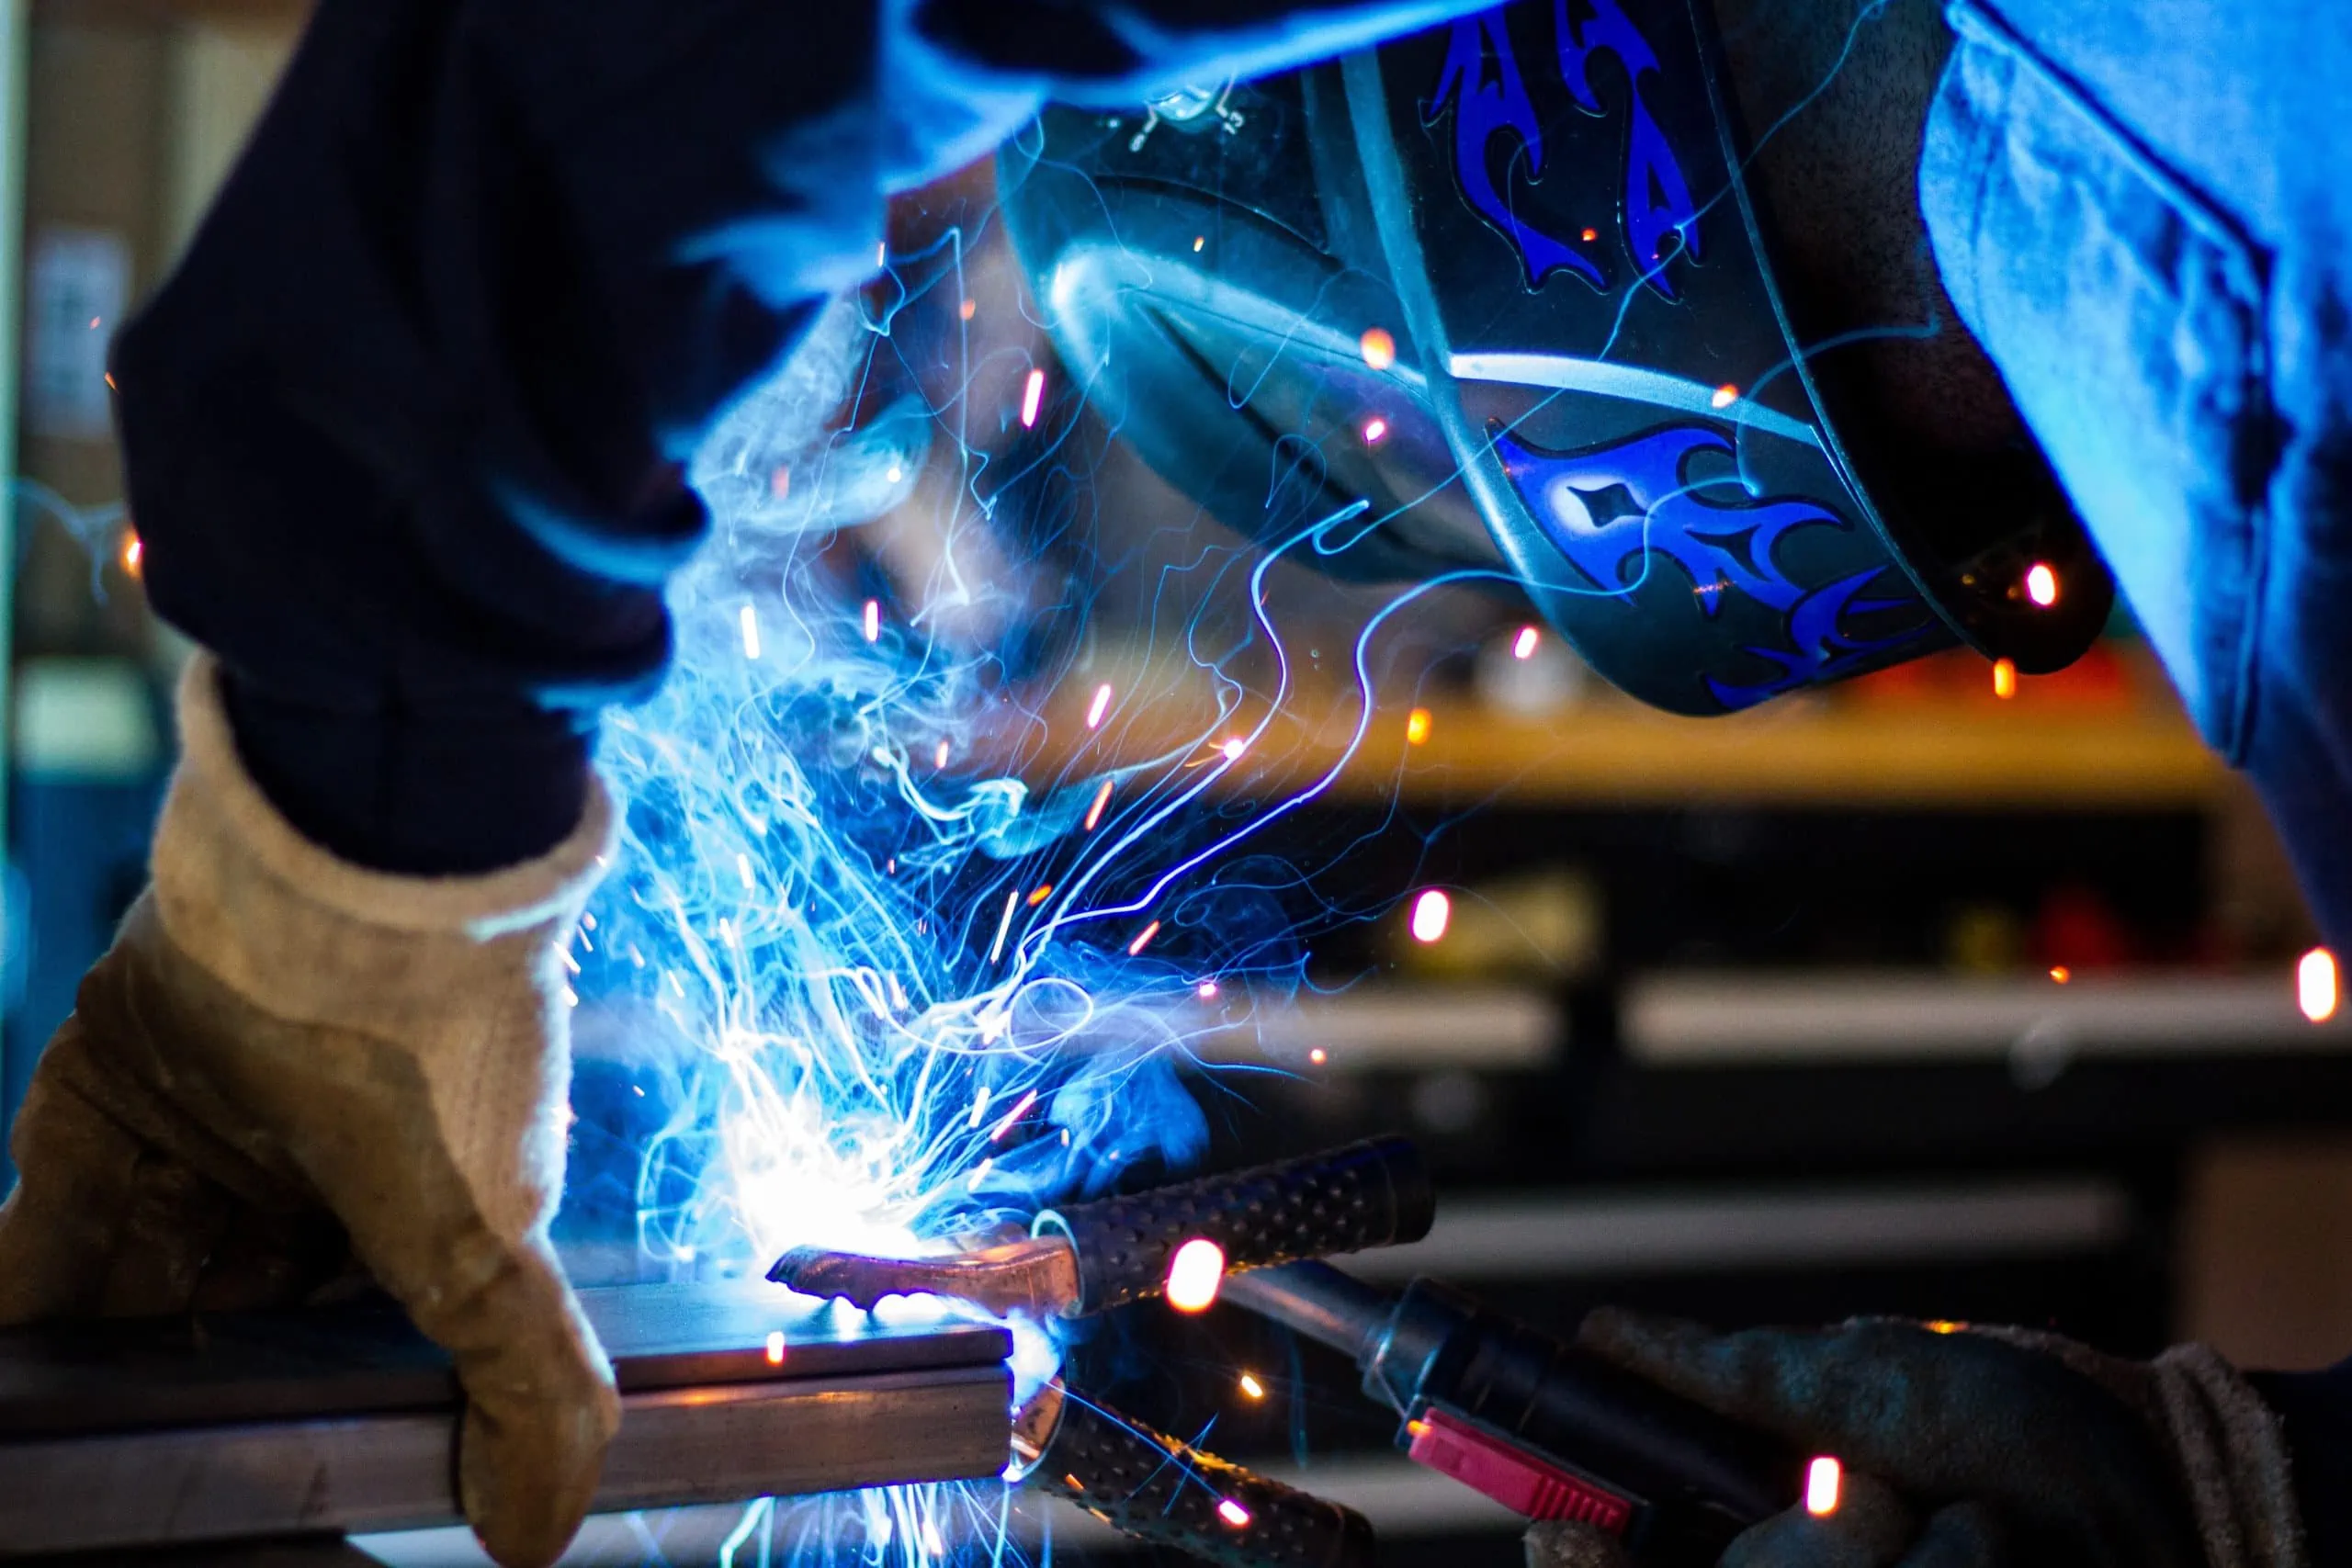 Man welding knows safety protocols ensured with security system manufacturers